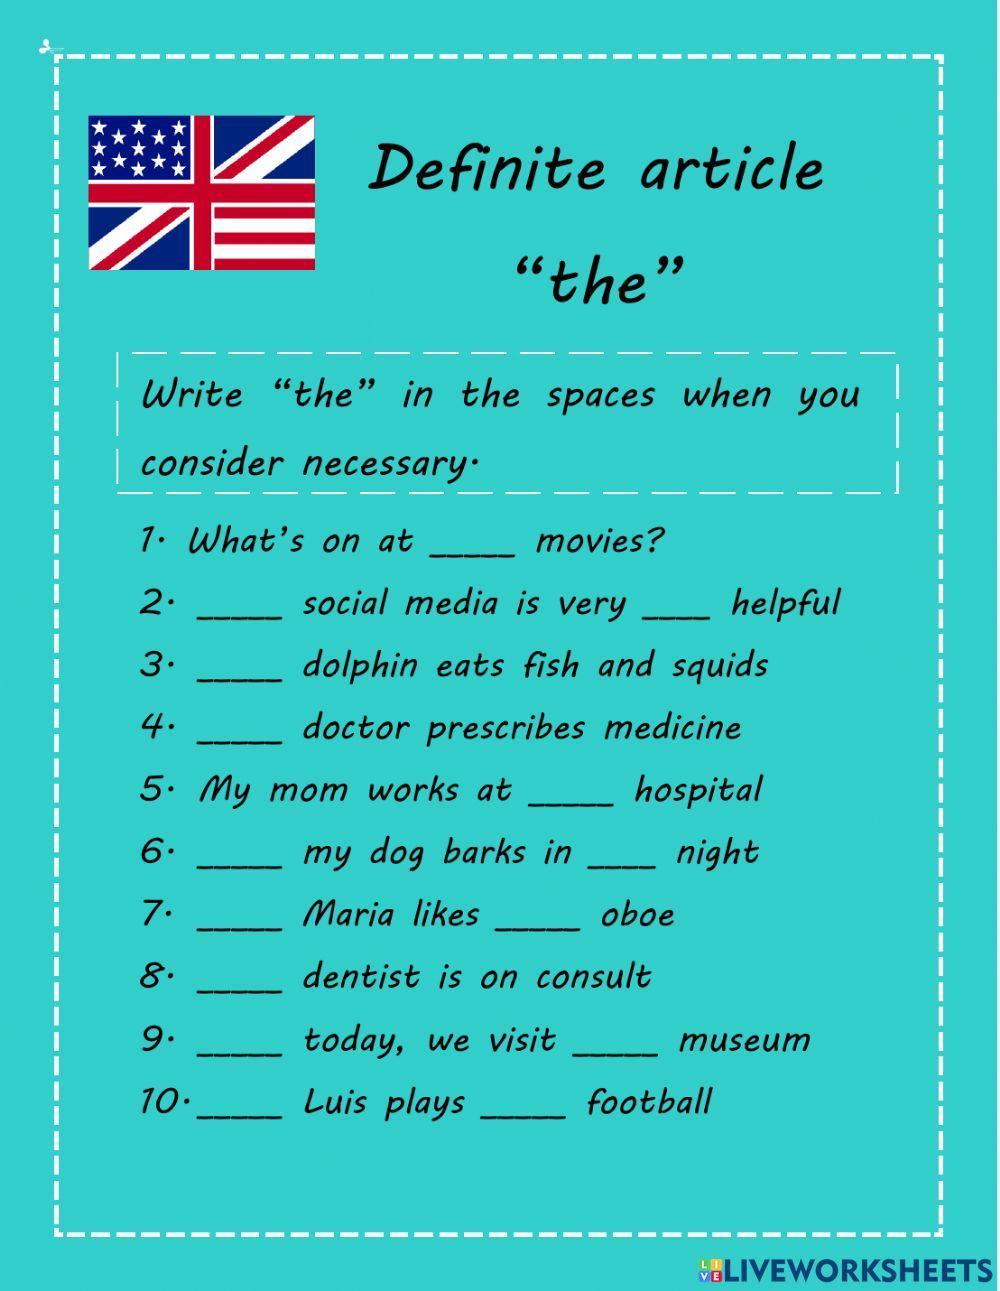 Indefinite article the